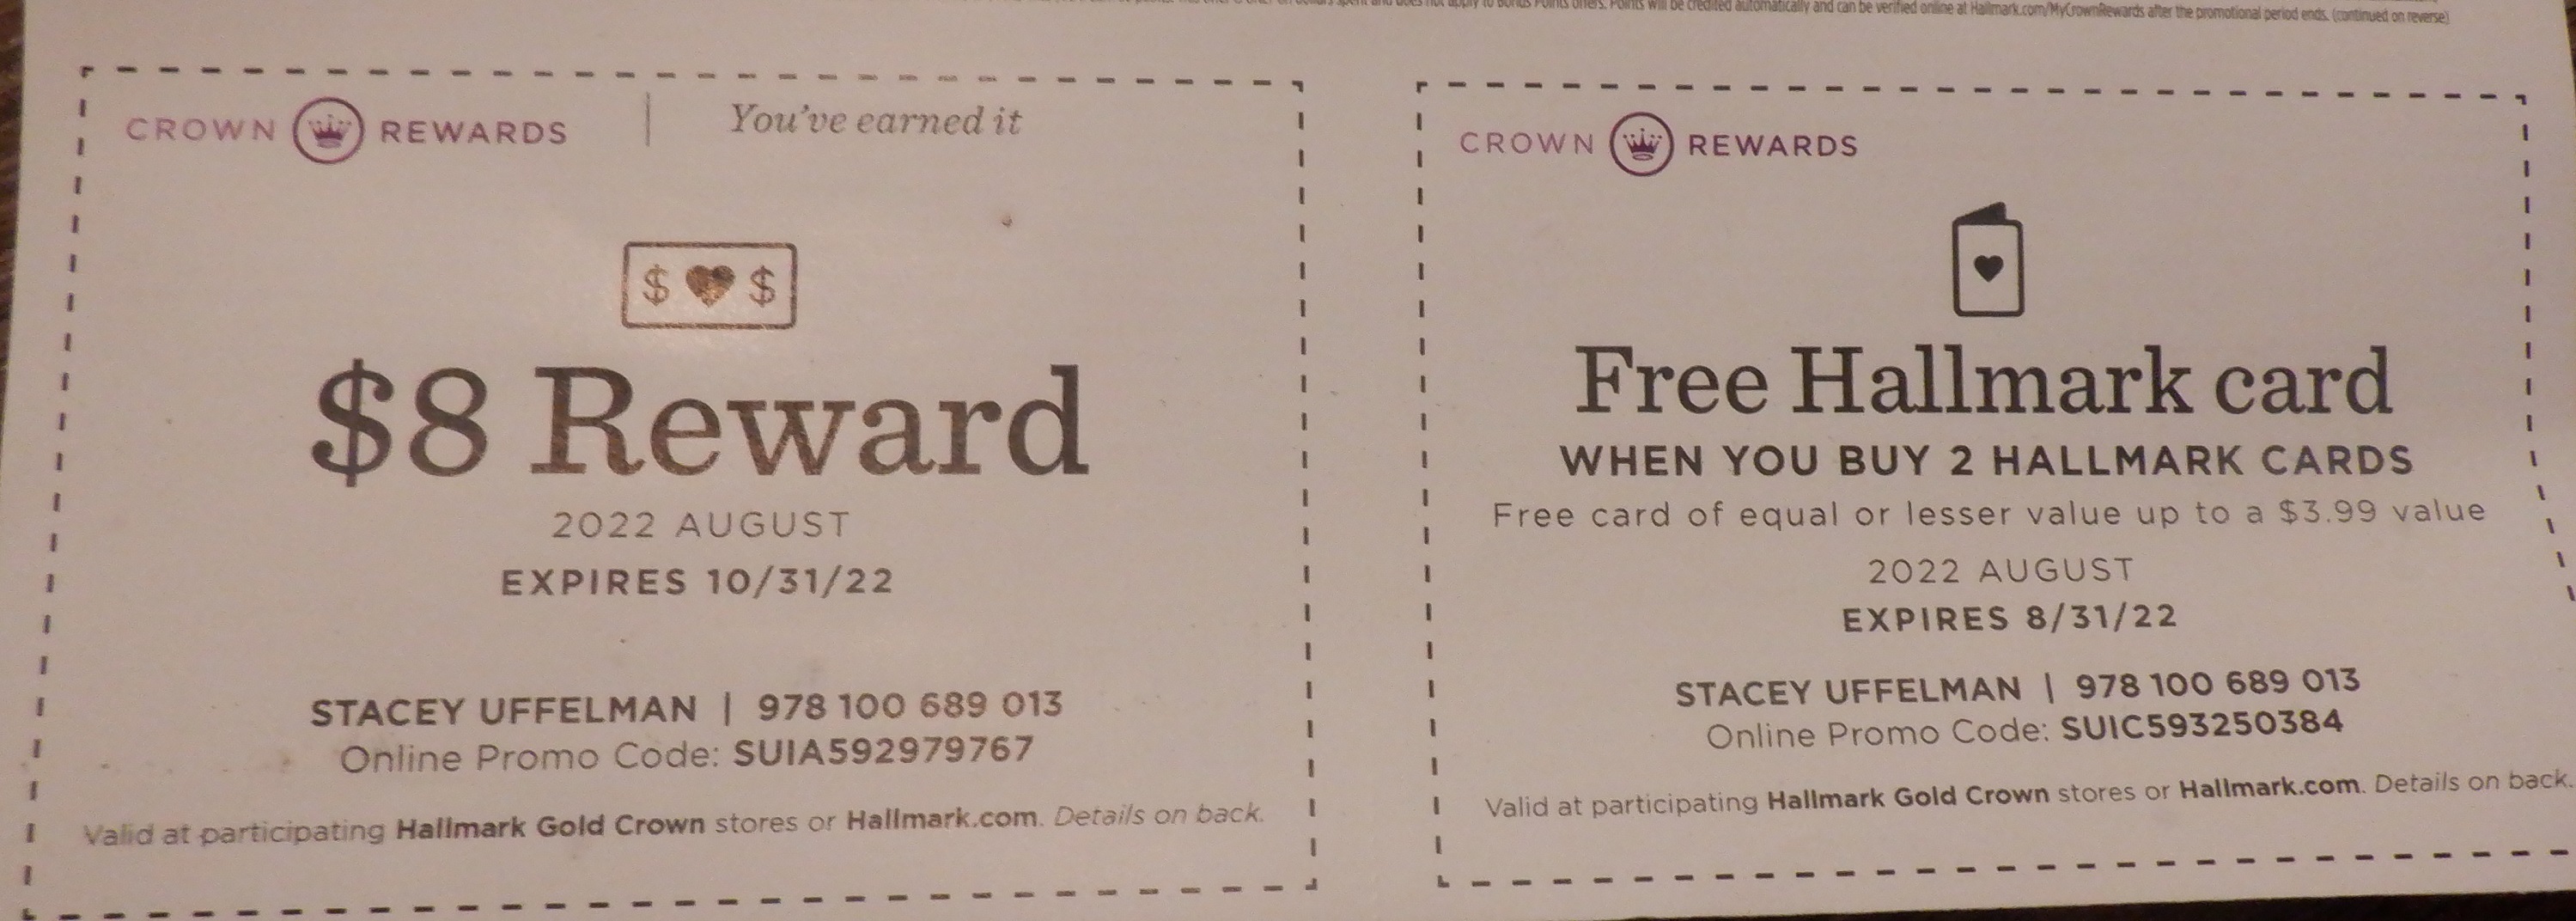 Coupons/reward certificates that I got from Hallmark